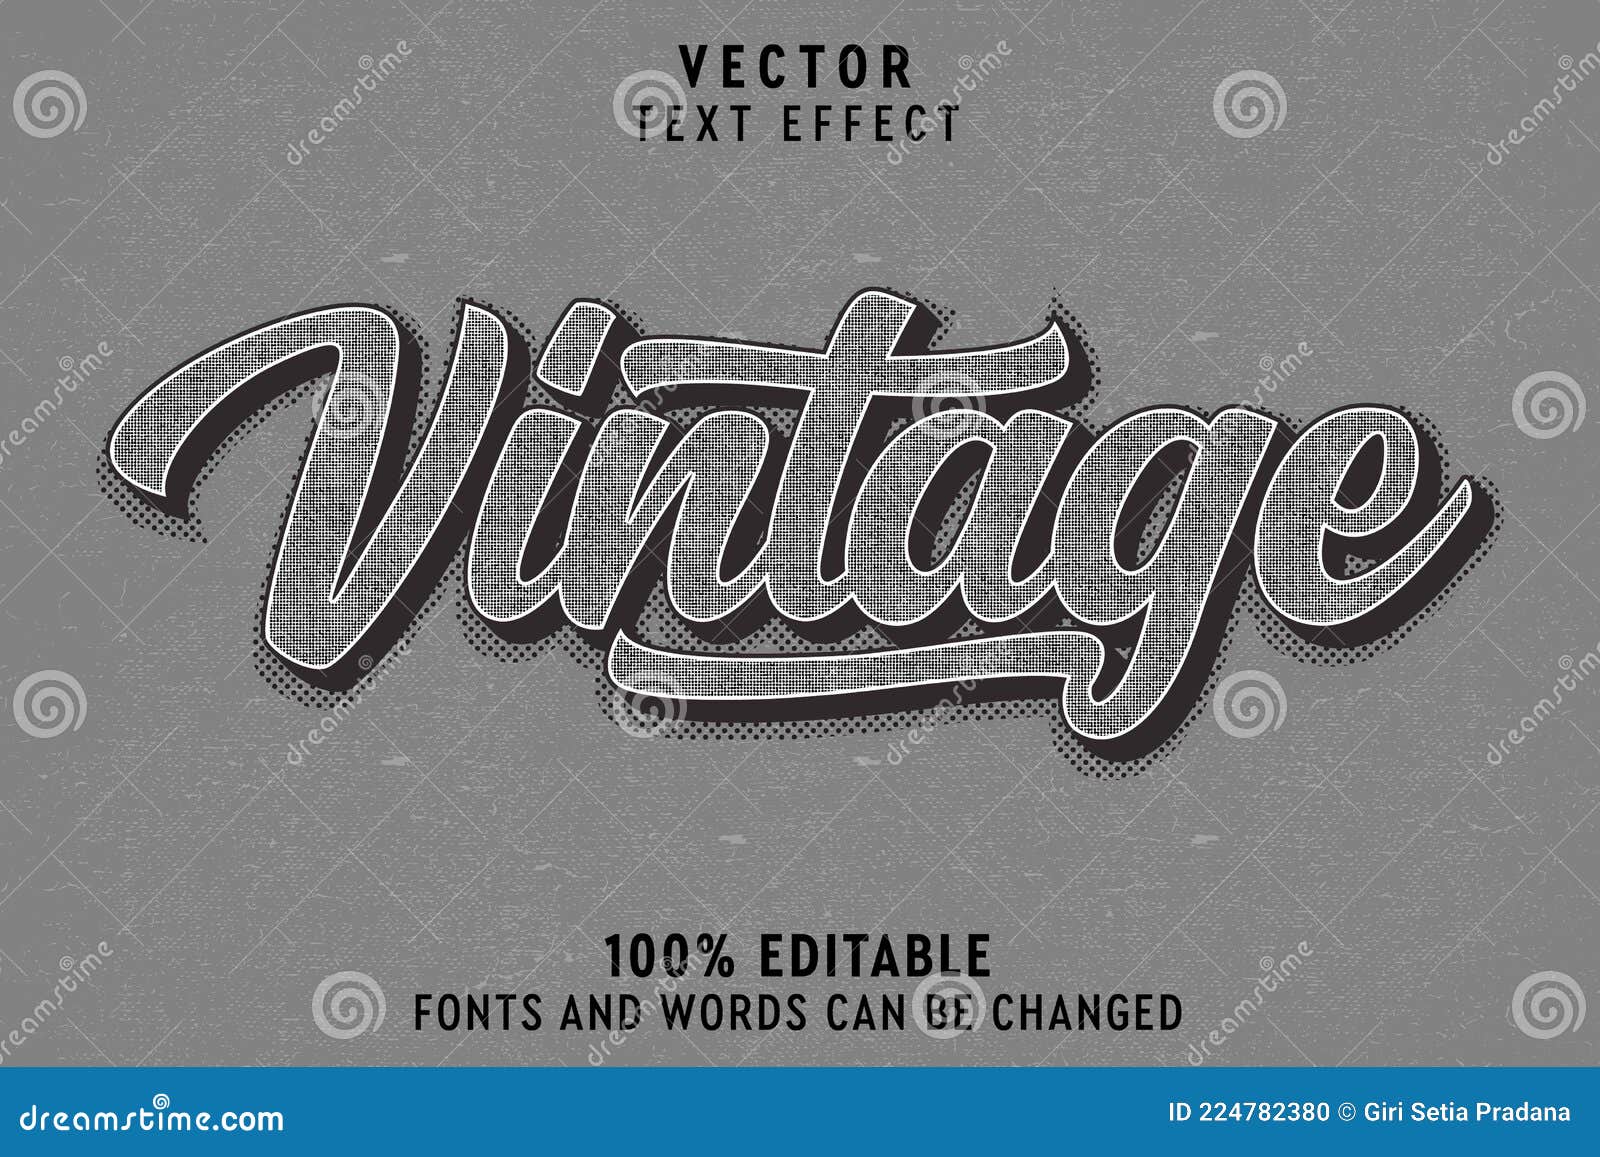 vintage editable to changed text effect style  